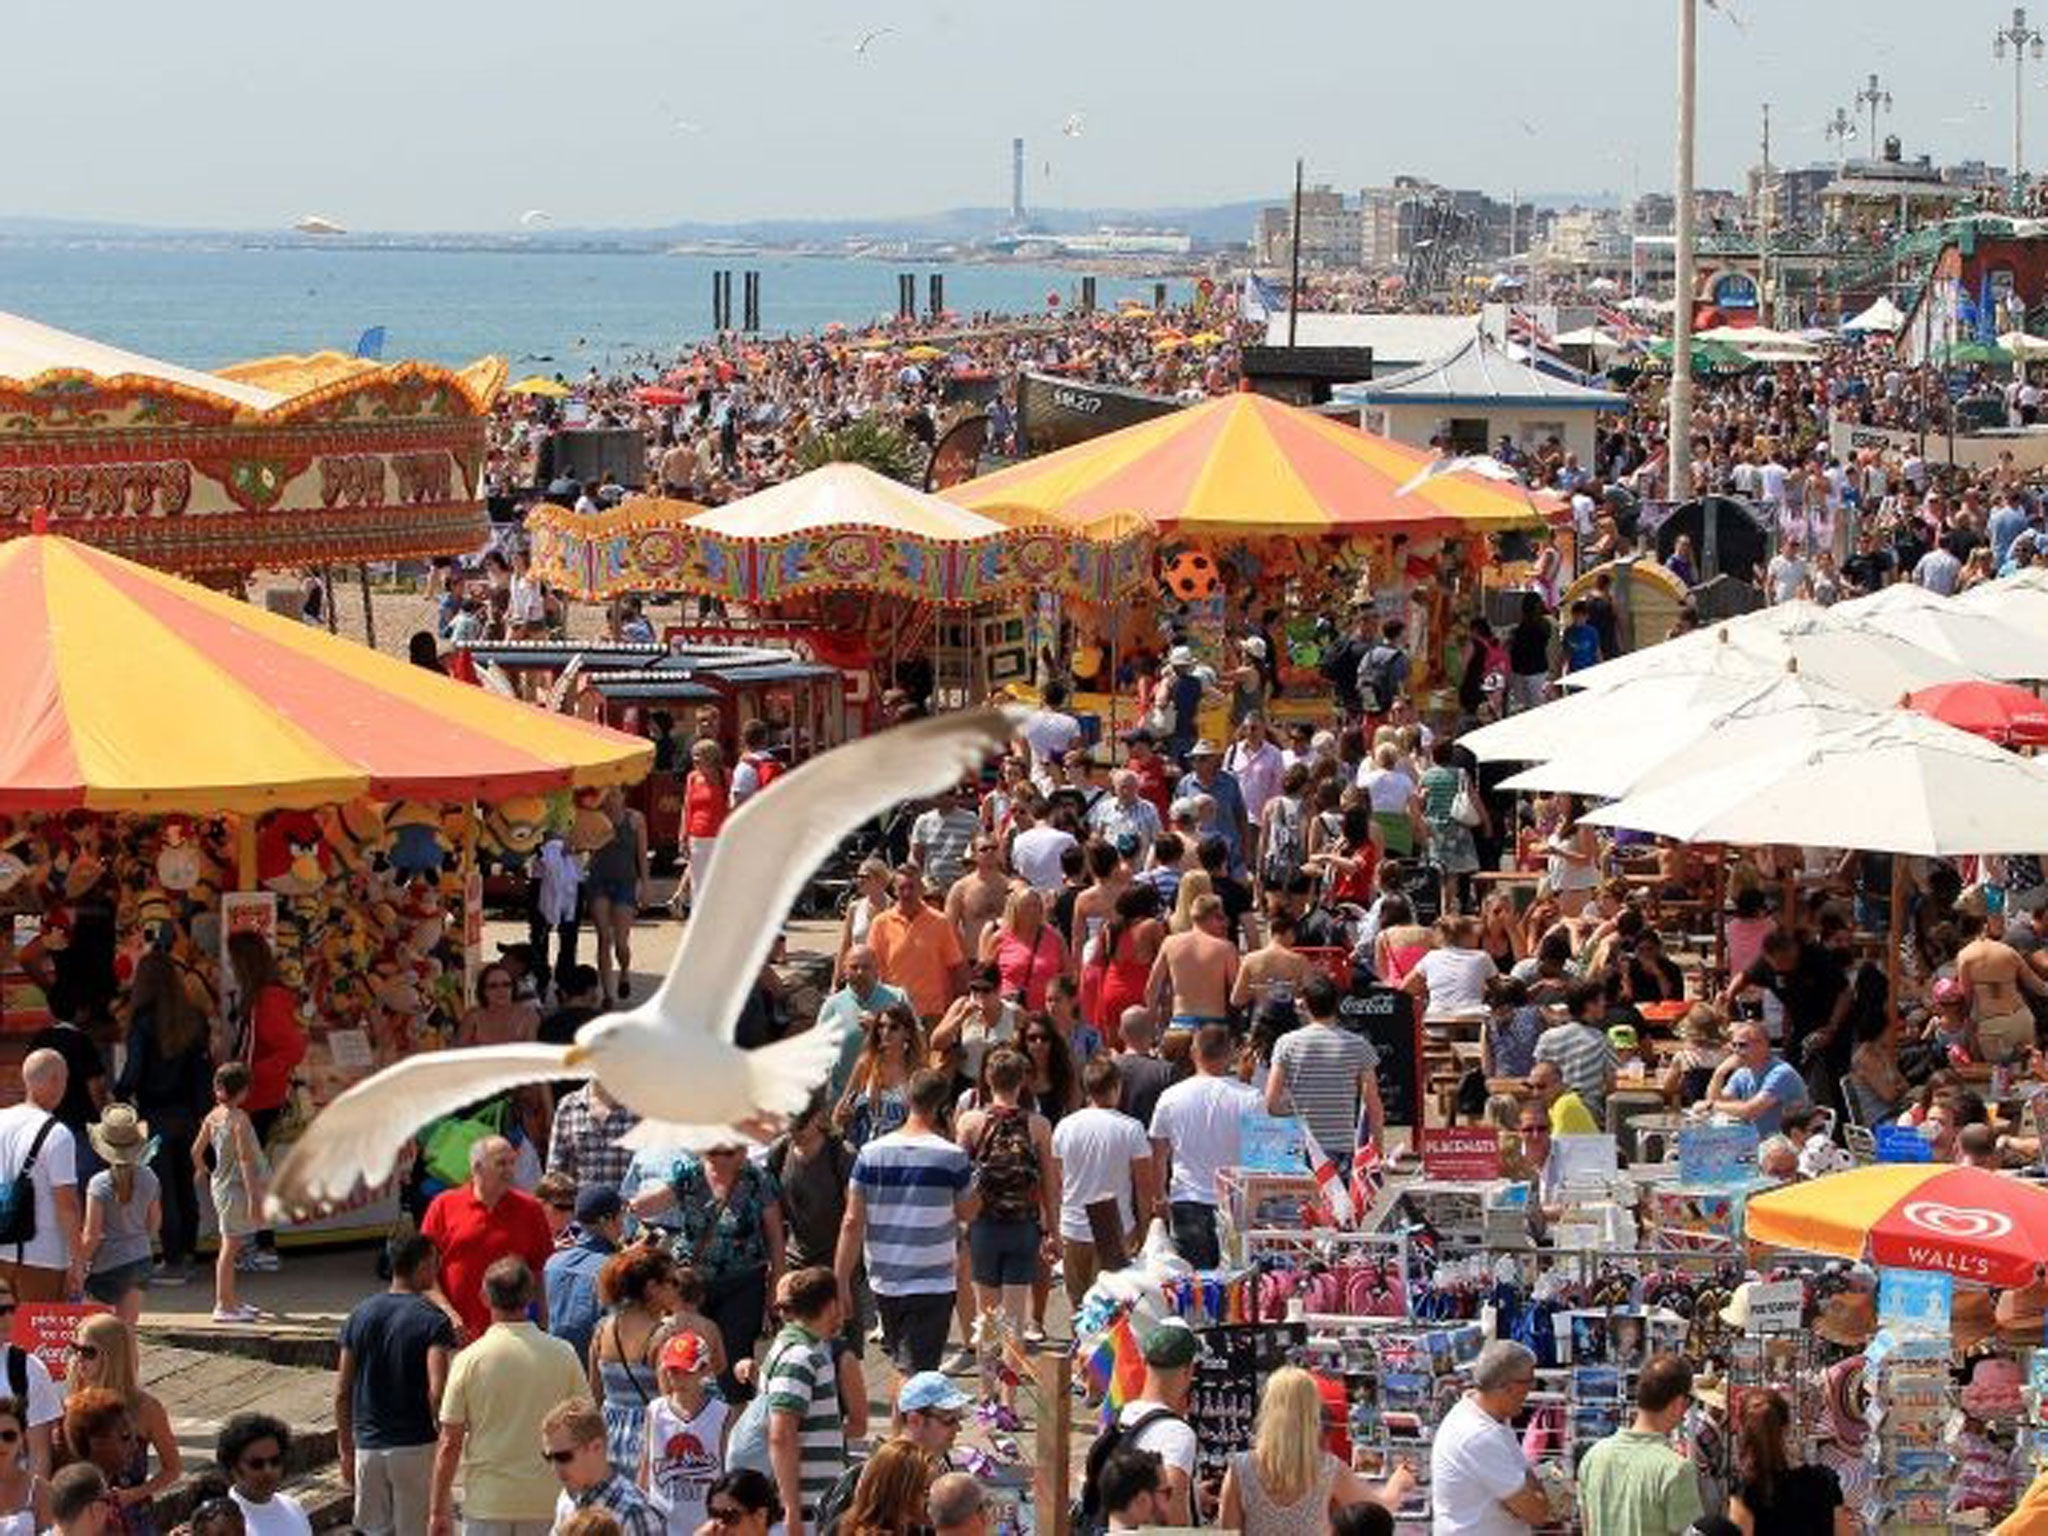 Revellers gather on Brighton beach as July promises more hot weather